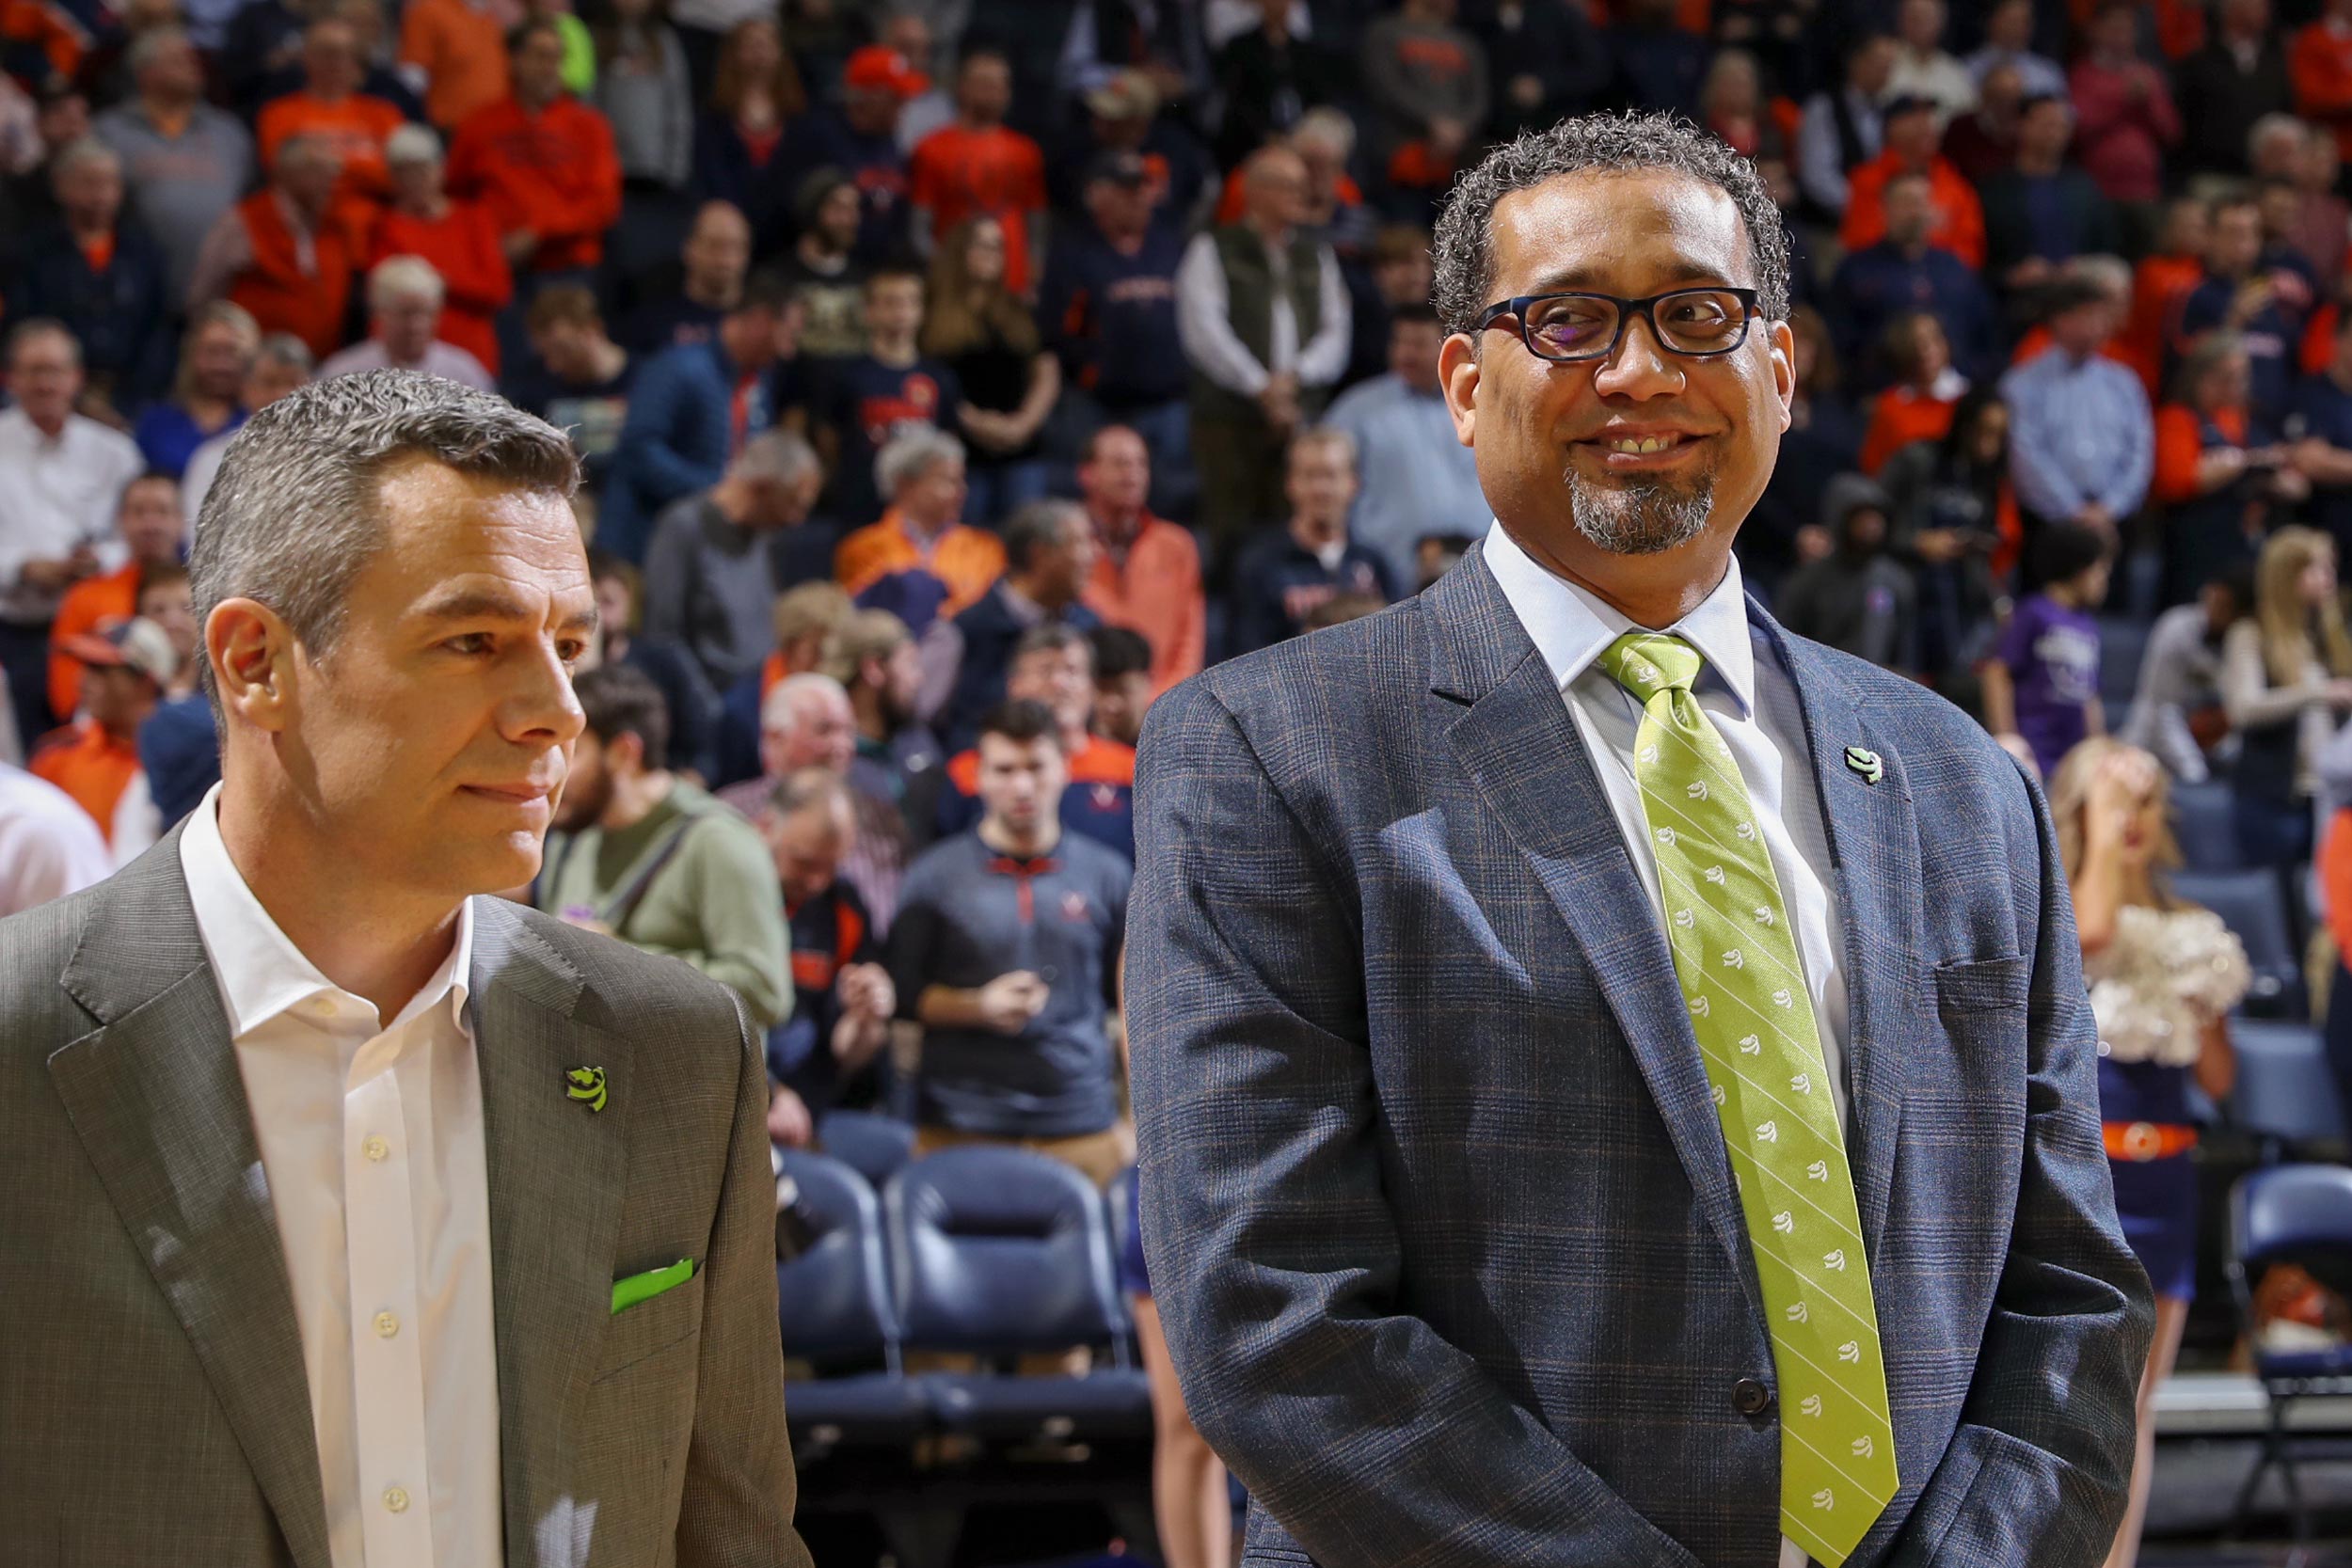 Jason Williford, right, stands next to Tony Bennett on the basketball court